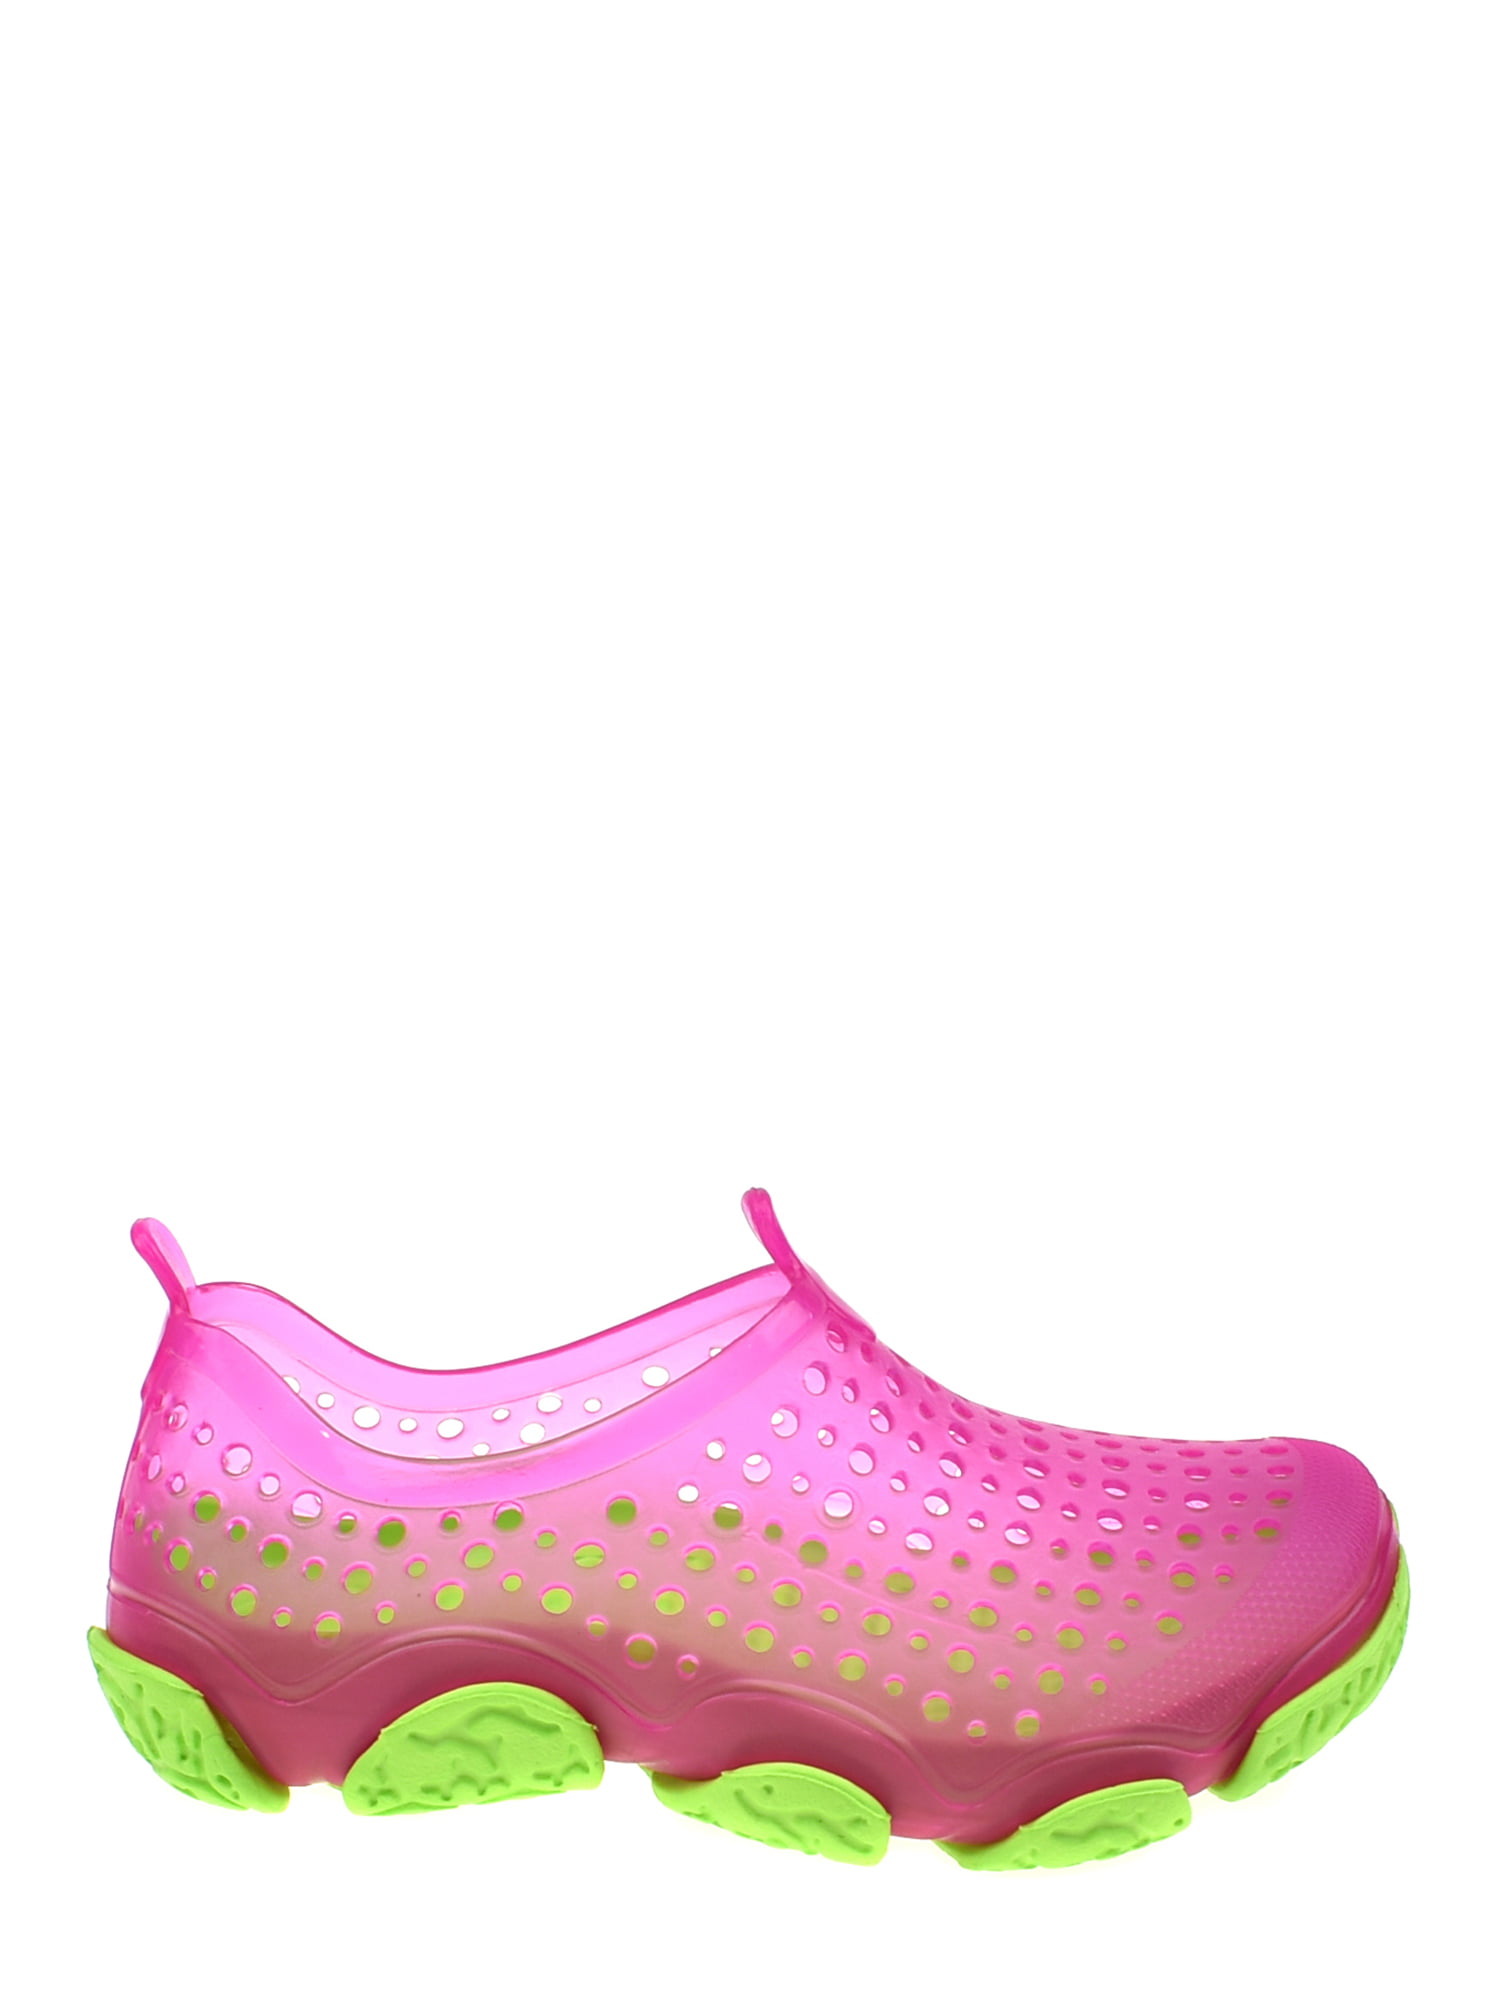 Details about   Wonder Nation Youth Slip-on Jelly Water Shoes Size 2-3